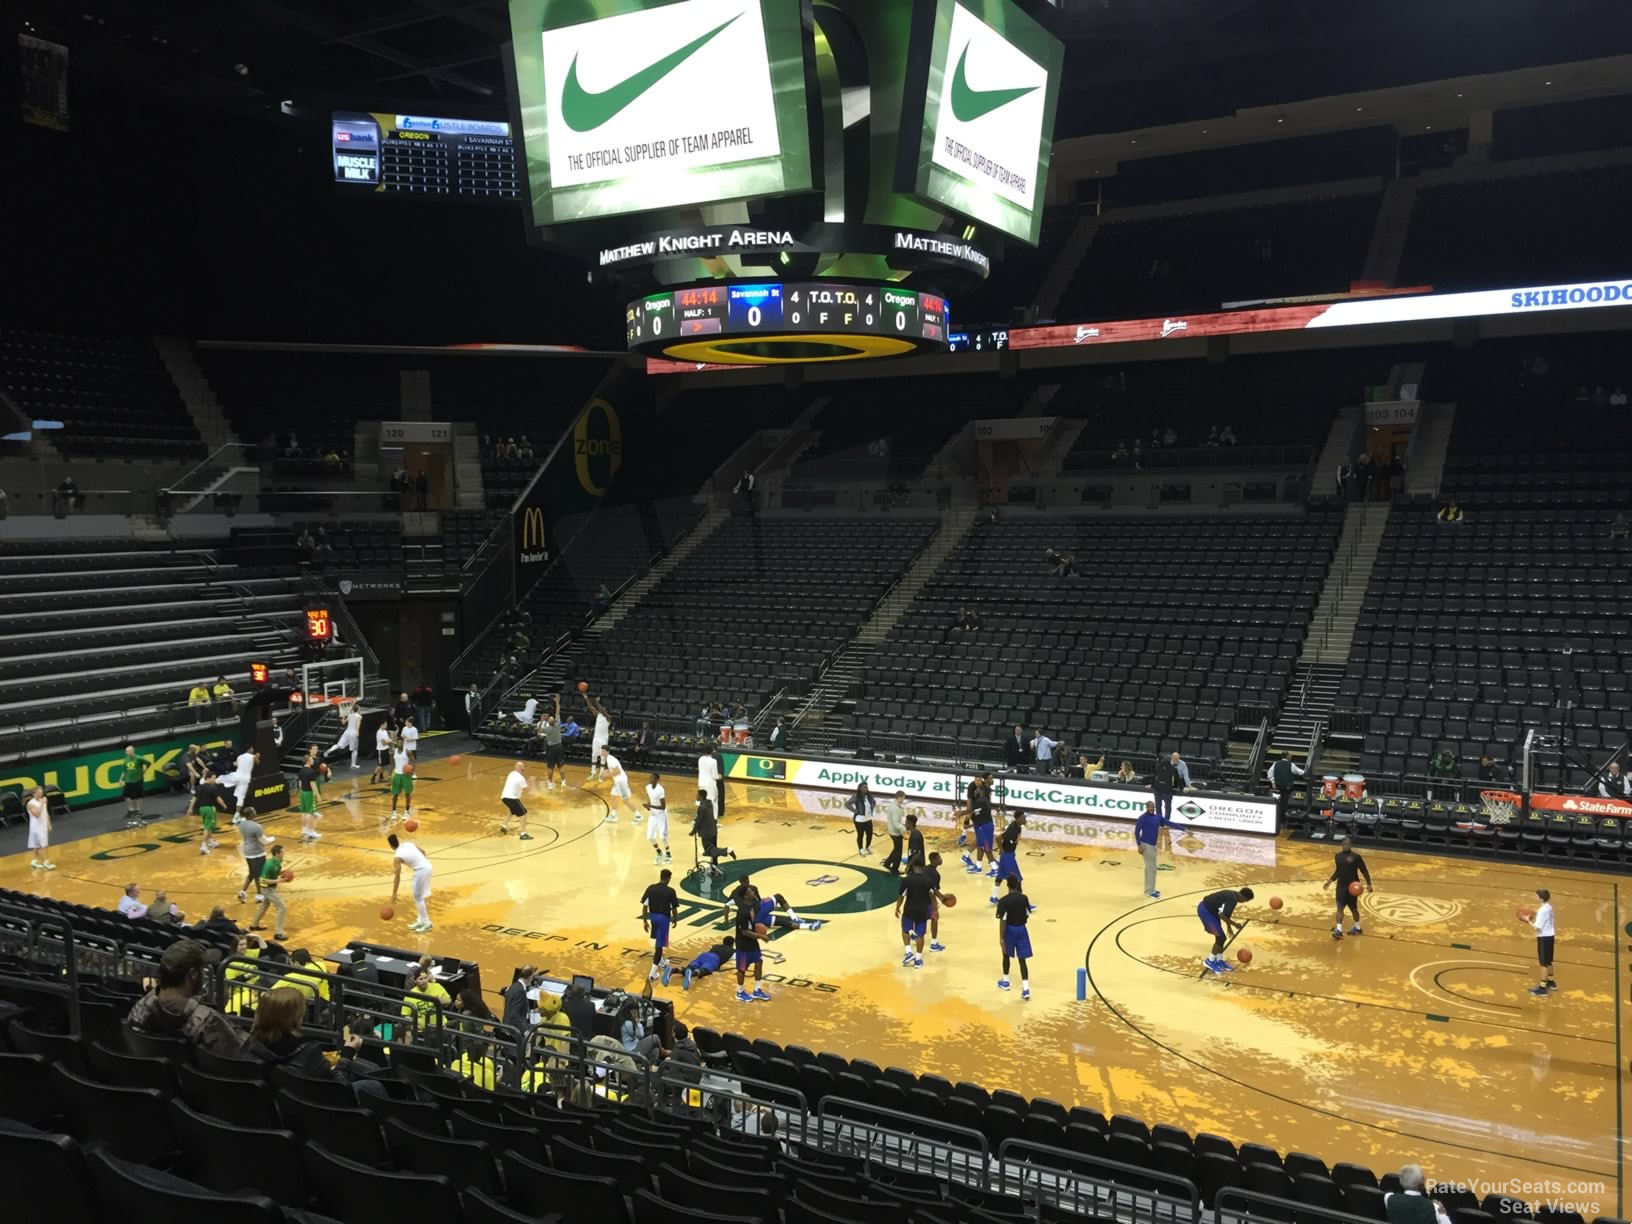 section 111, row k seat view  - matthew knight arena